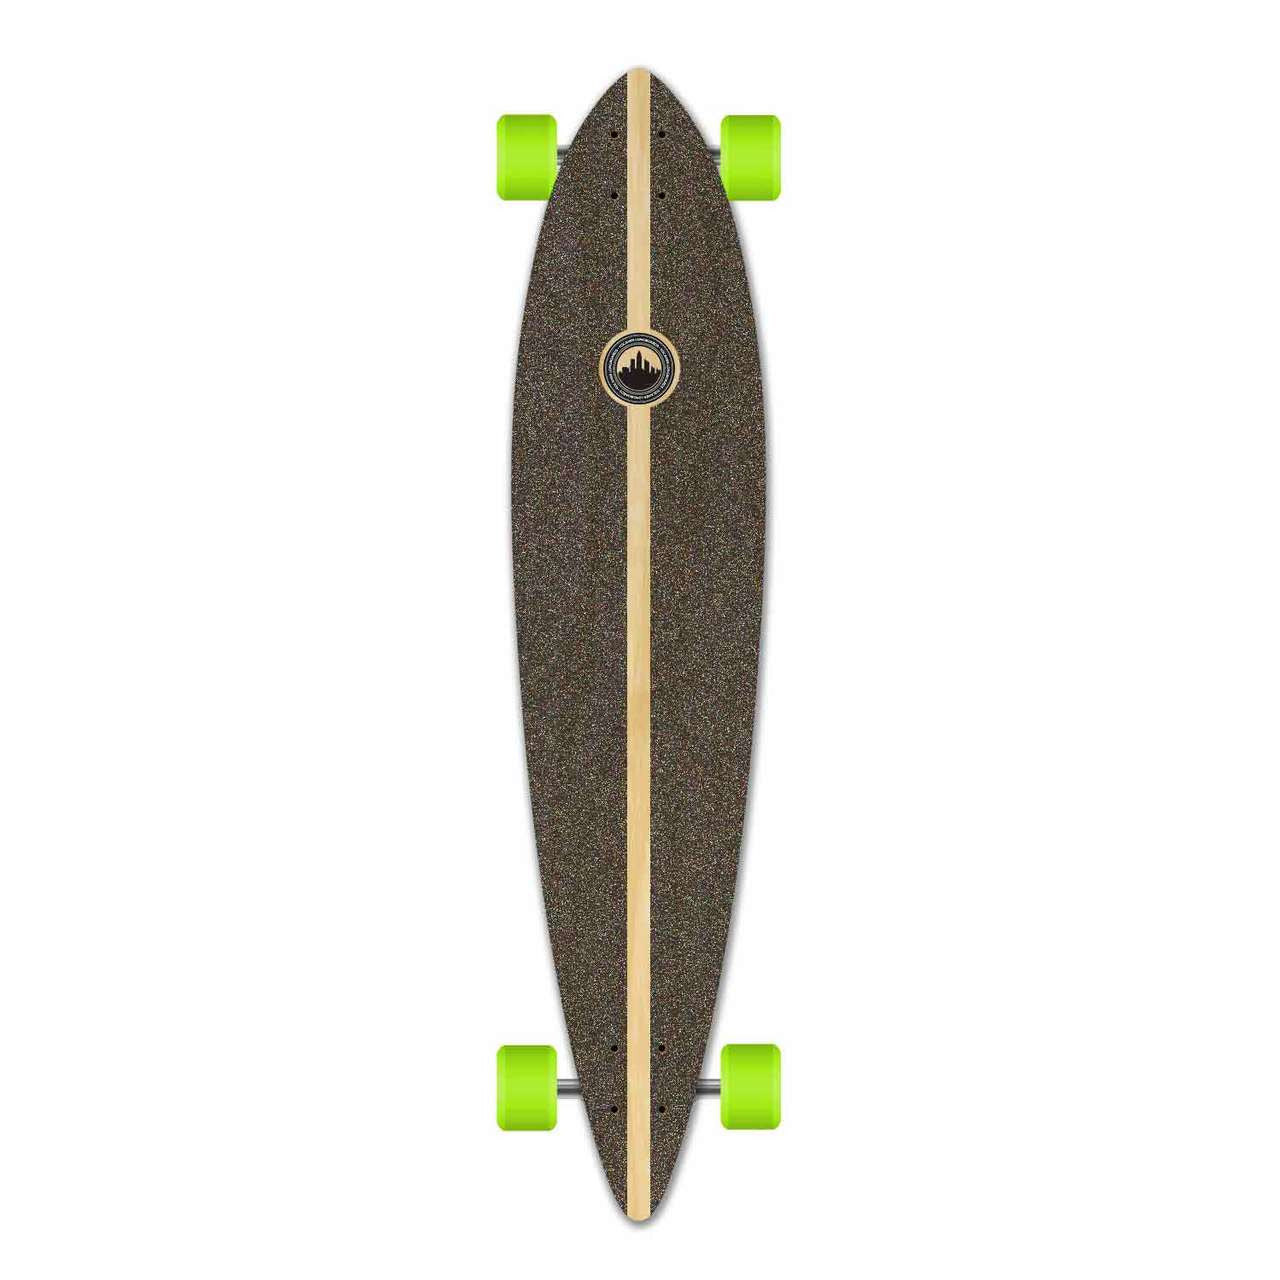 Yocaher Pintail Longboard Complete - In the Pines : Rasta